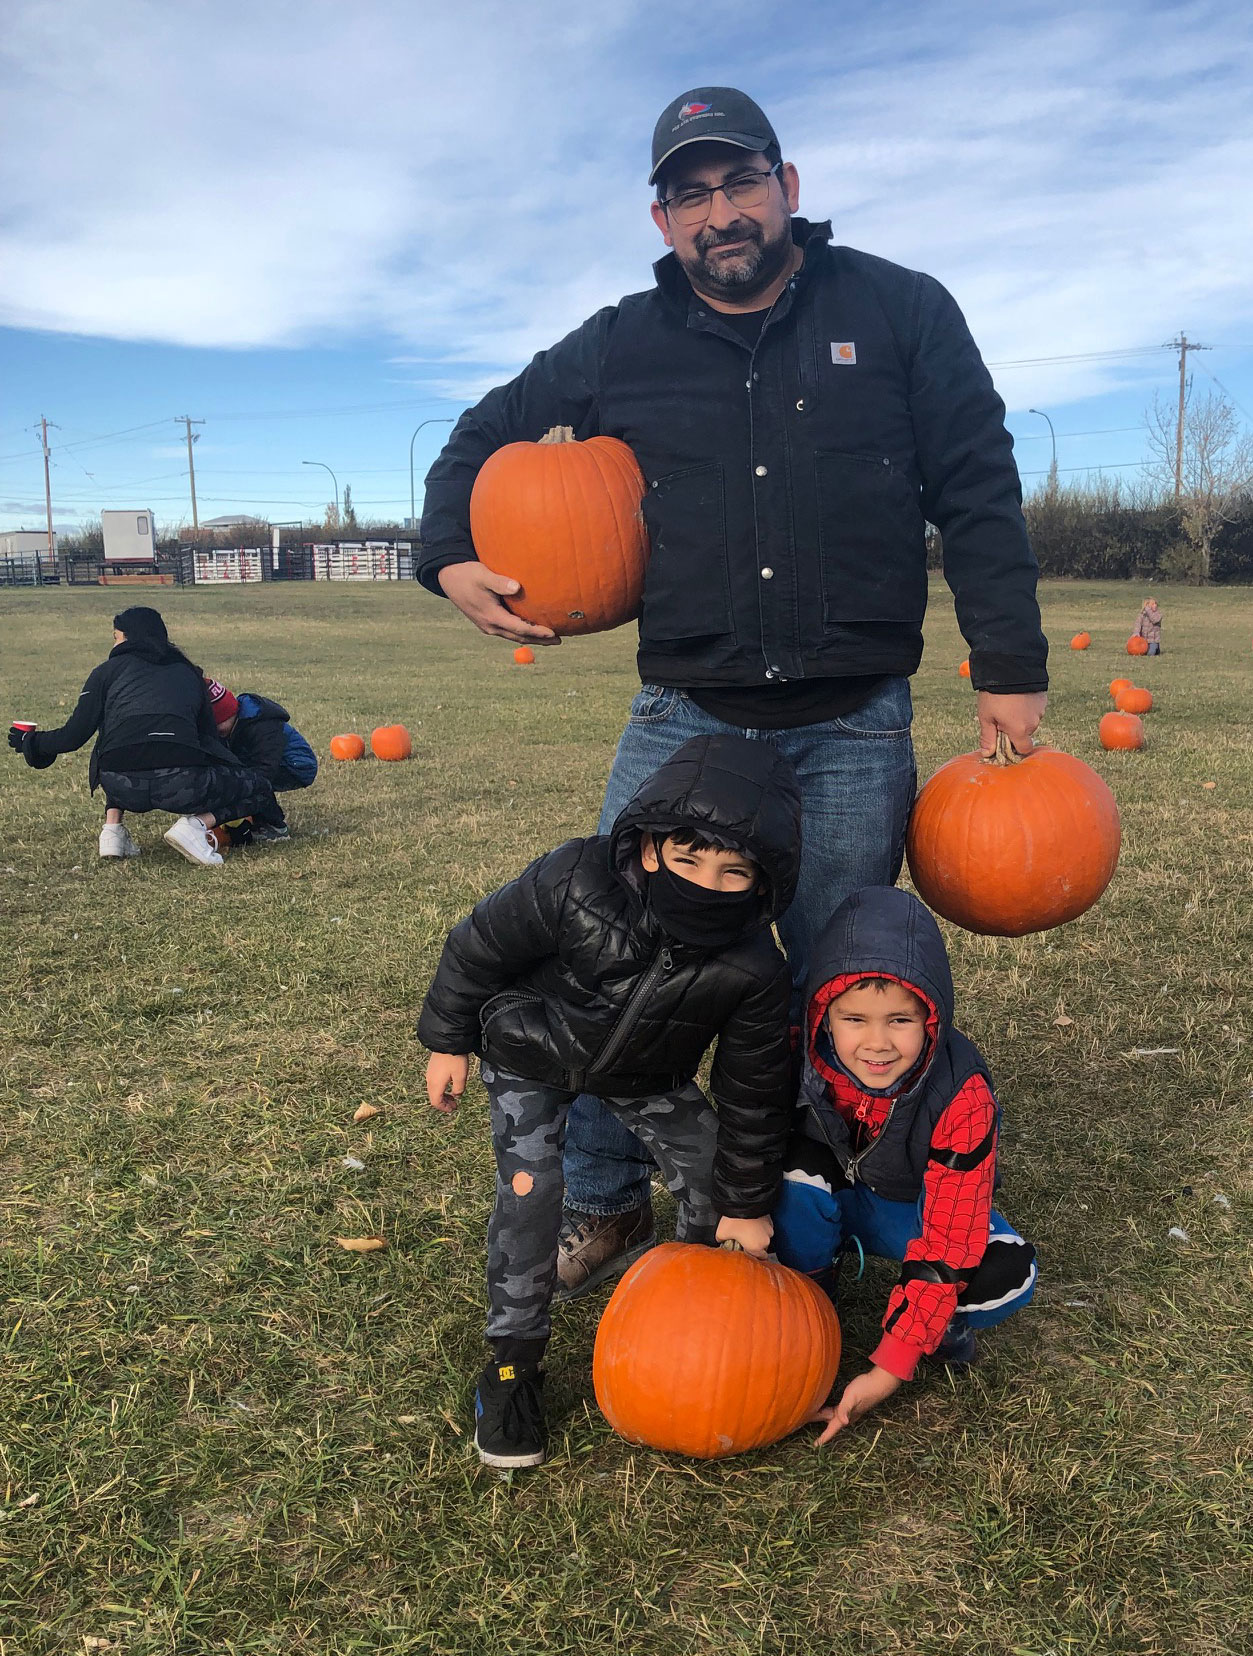 Chestermere-gets-into-the-Halloween-spirit-with-annual-Pumpkin-Patch-pic-1